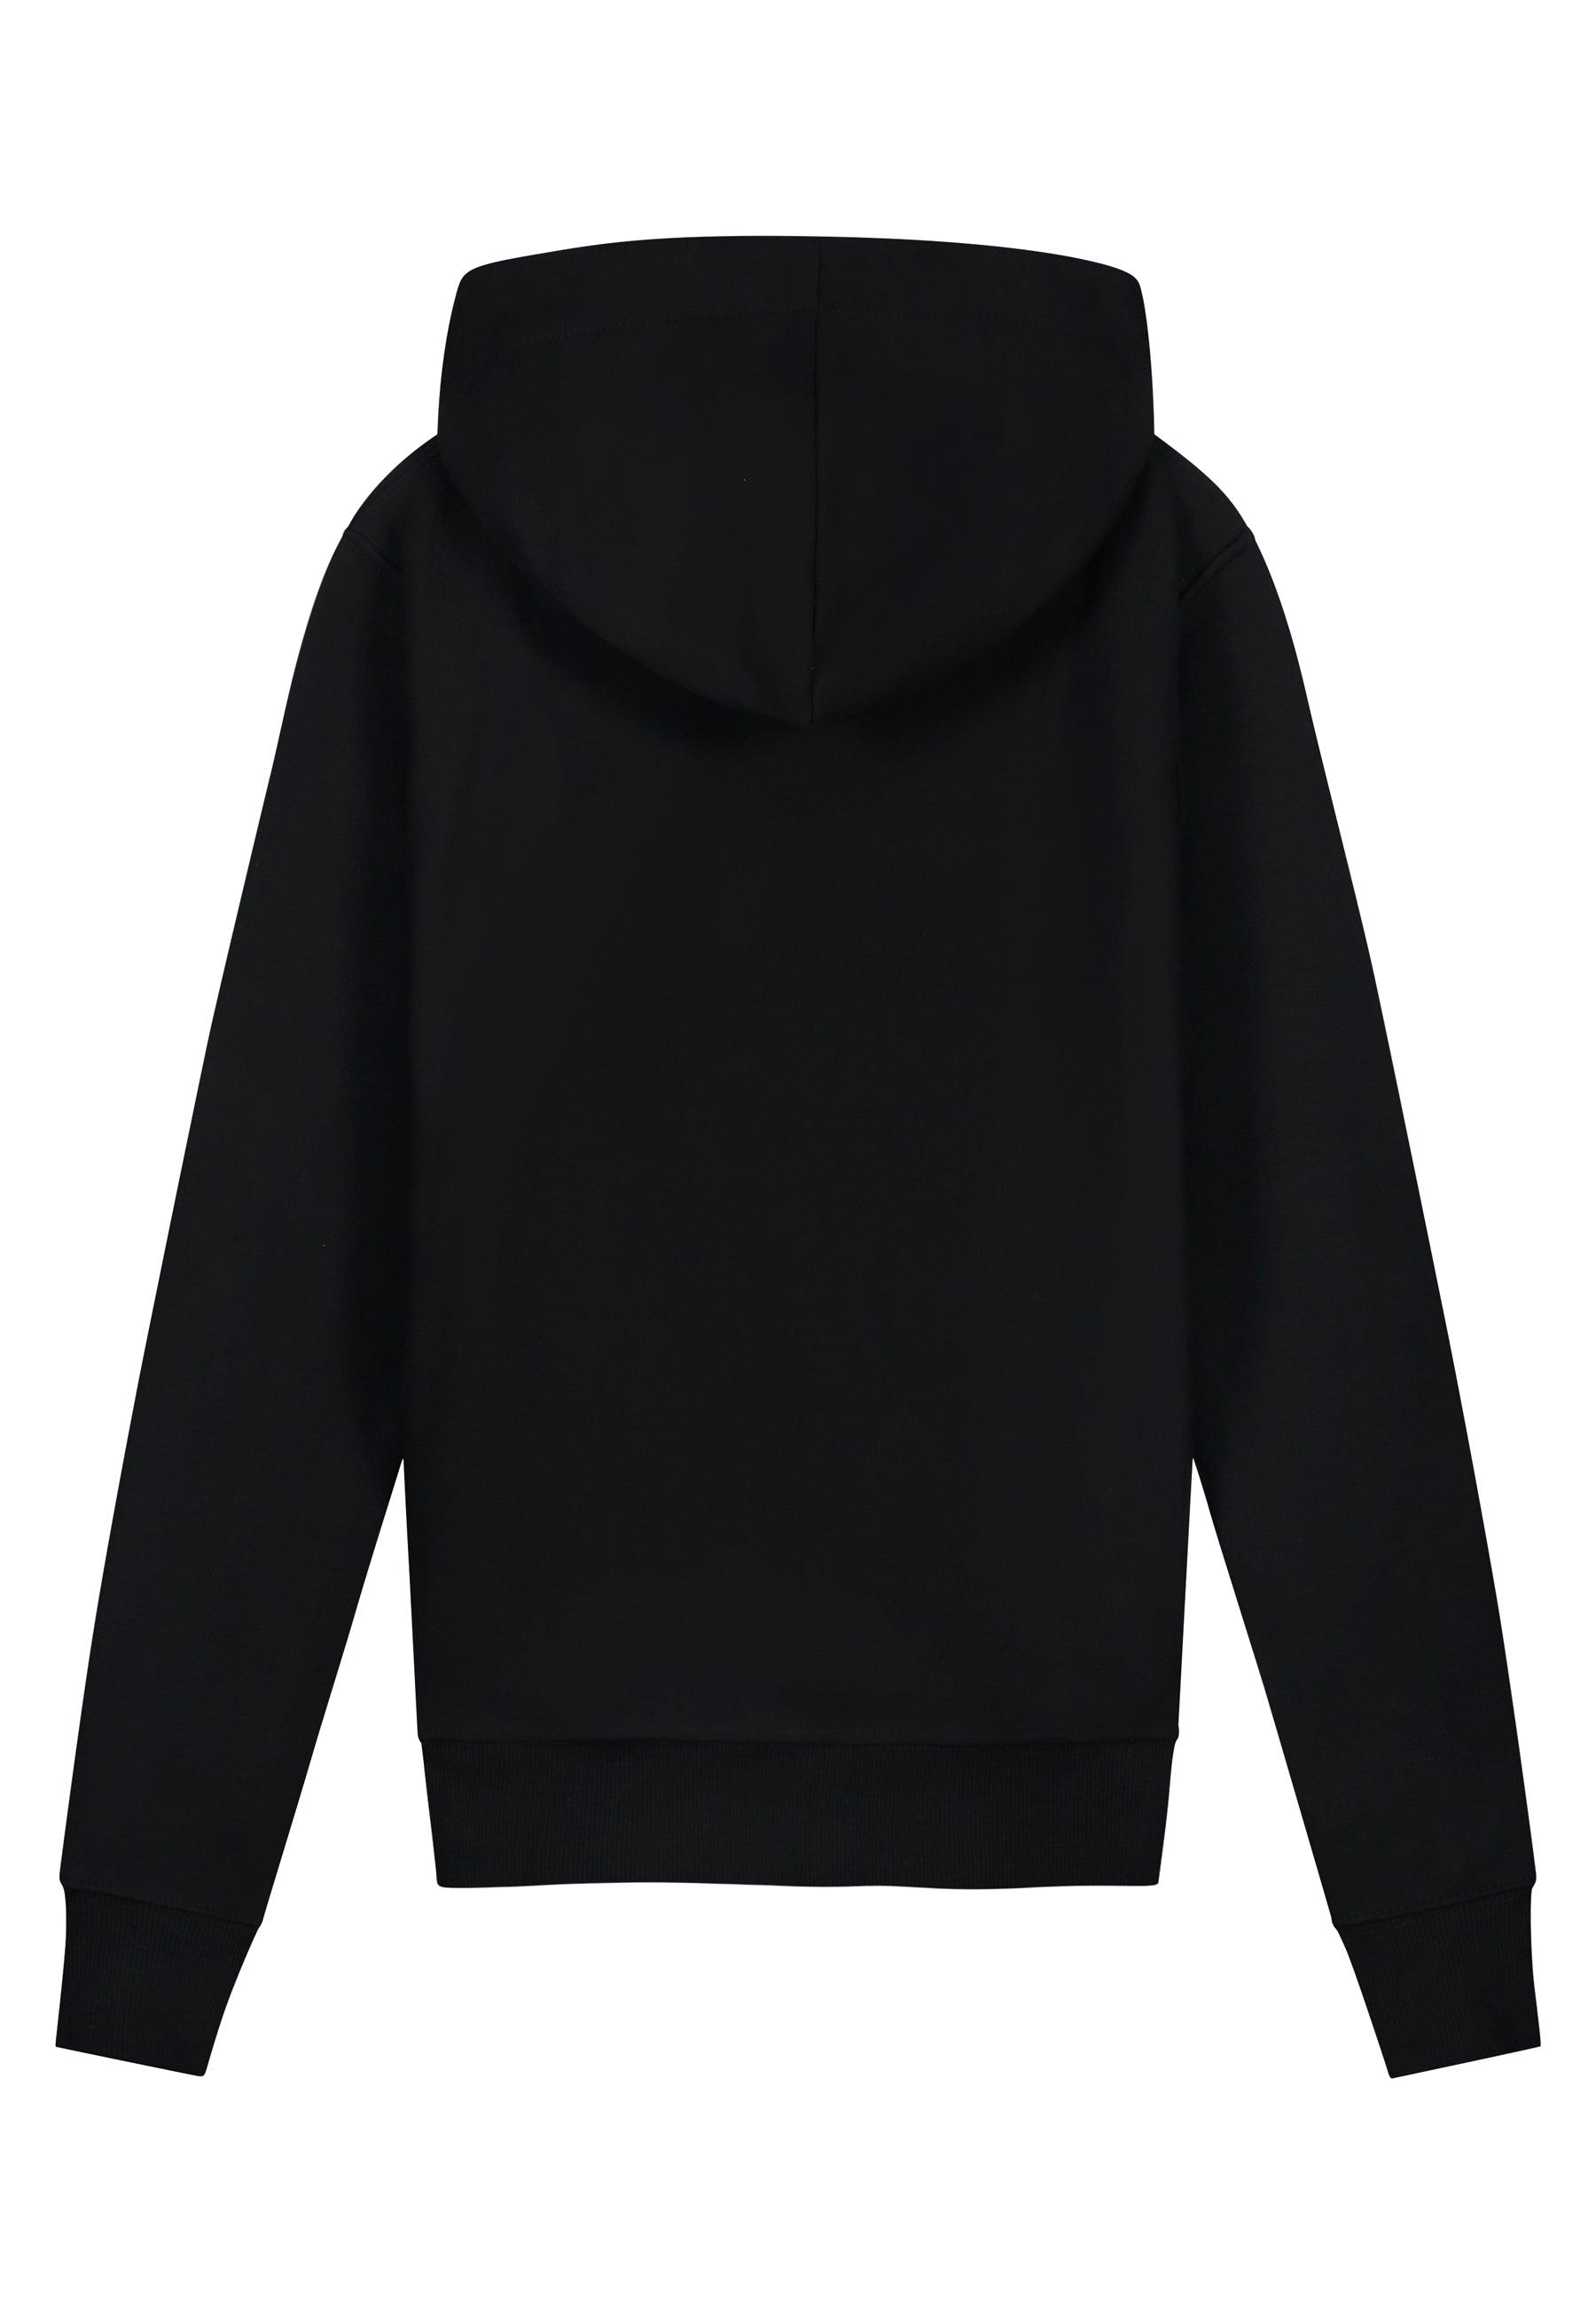 Black hoodie Amsterdam – Collect Artwork Label The